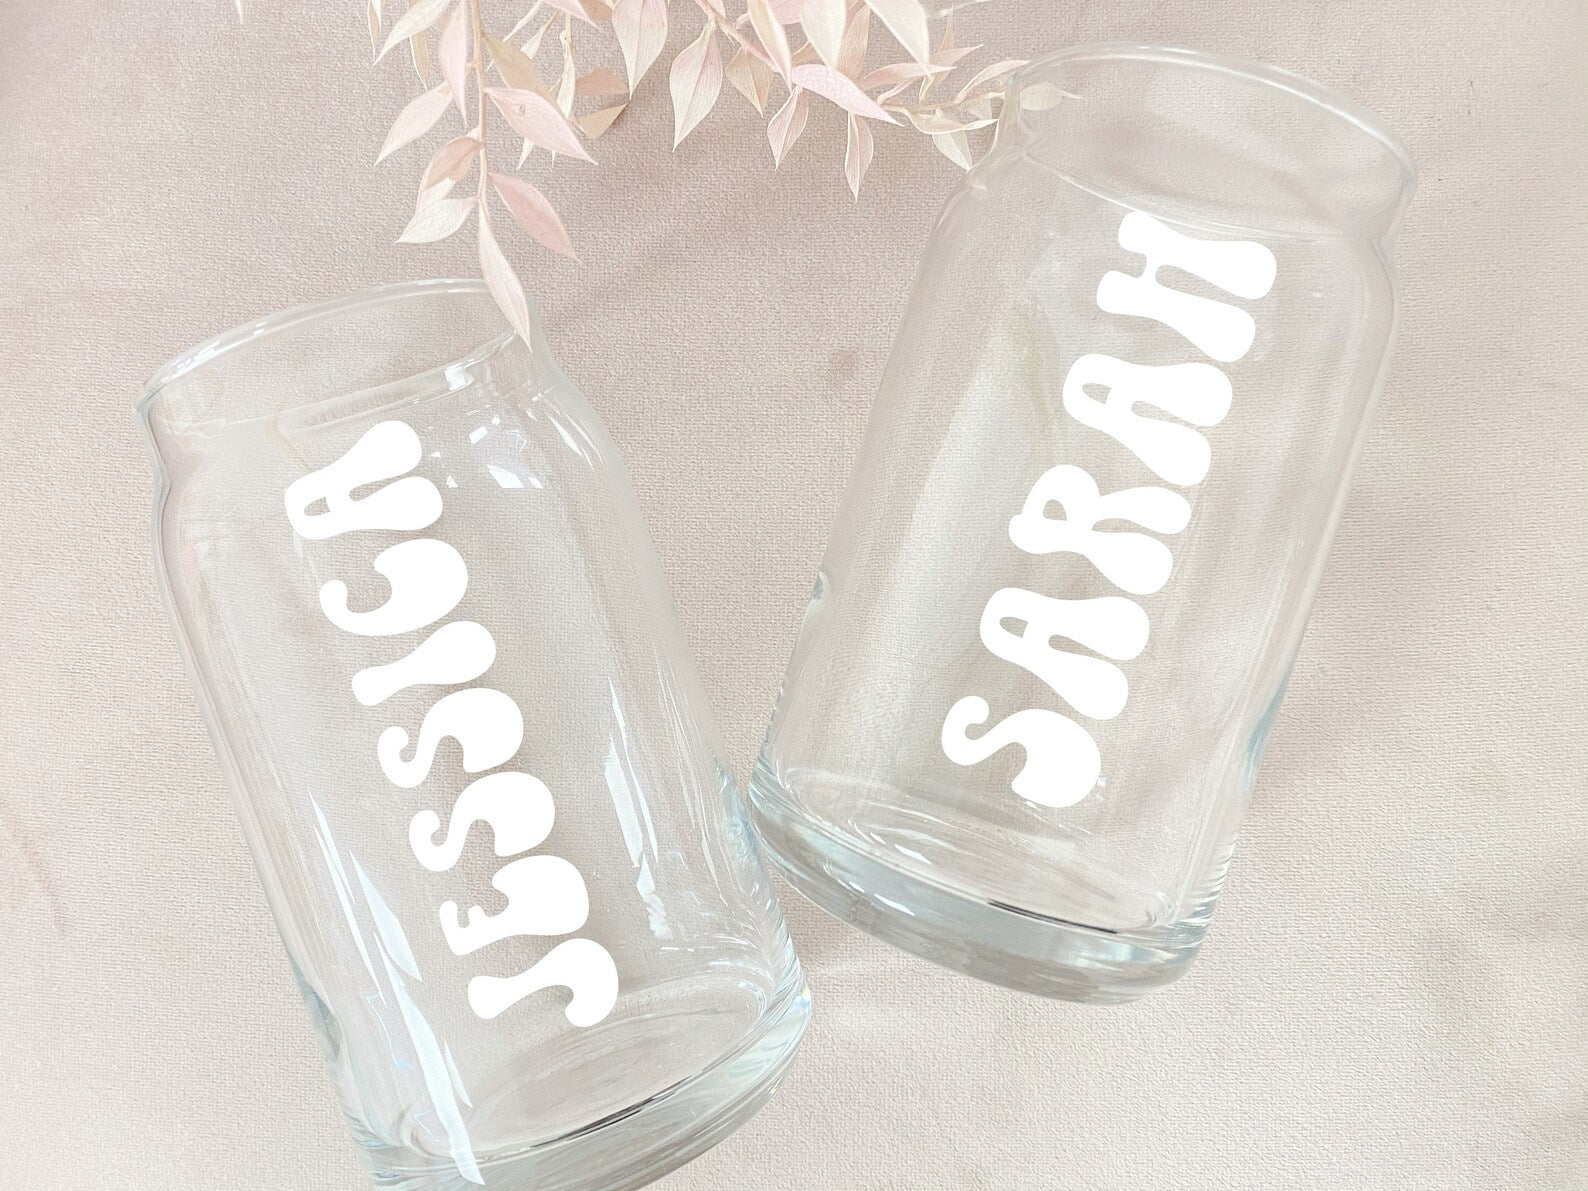 Personalized ice coffee cup - beer can glass soda cup with name- retro bridesmaid proposal glass gift for women maid of honor- bridal party